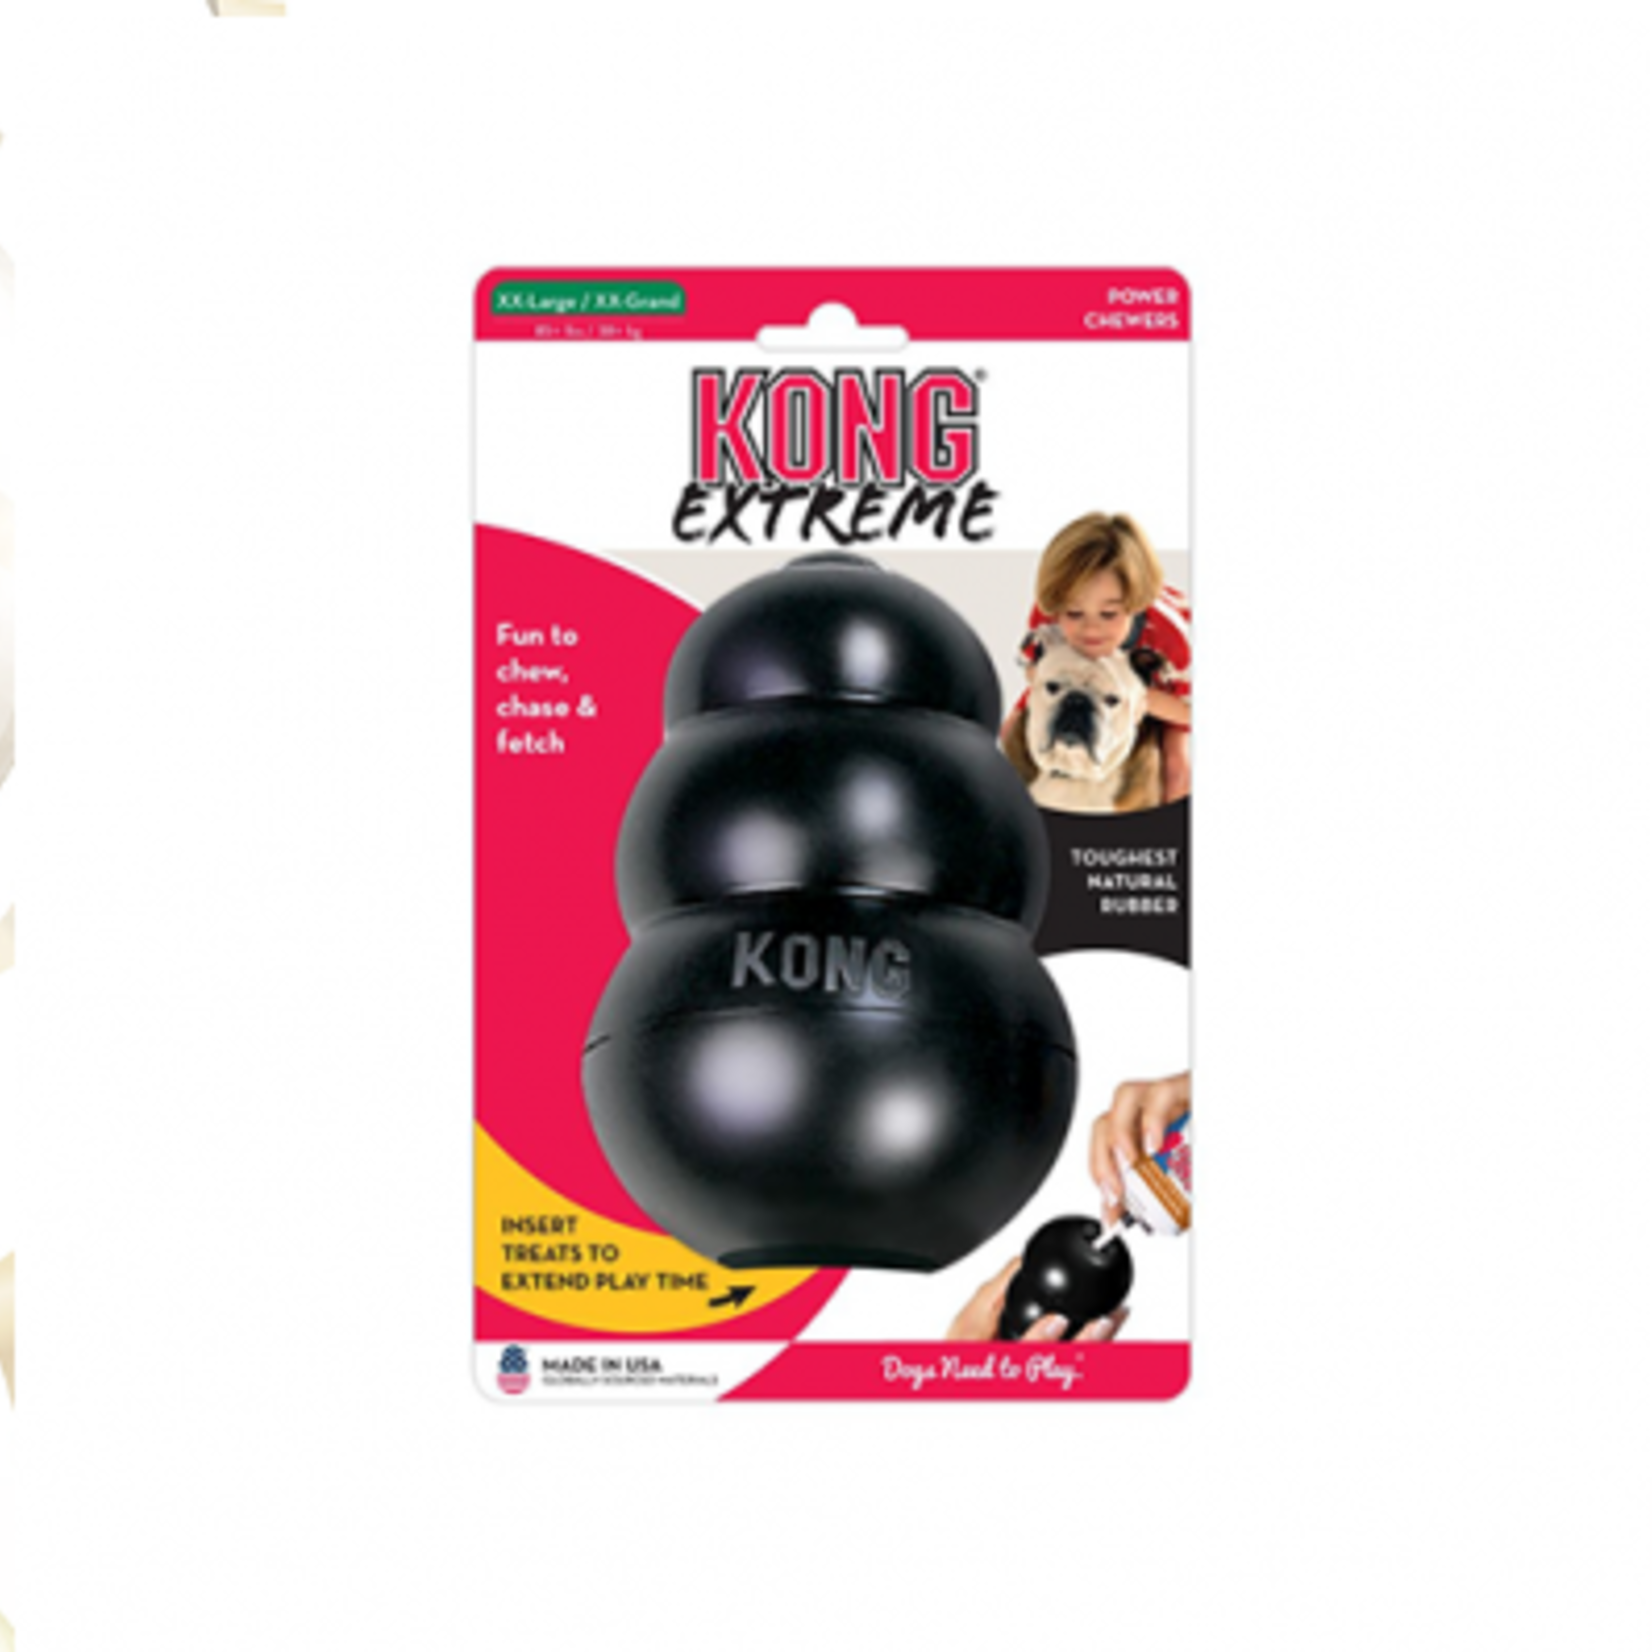 Kong EXTREME -  the most durable rubber